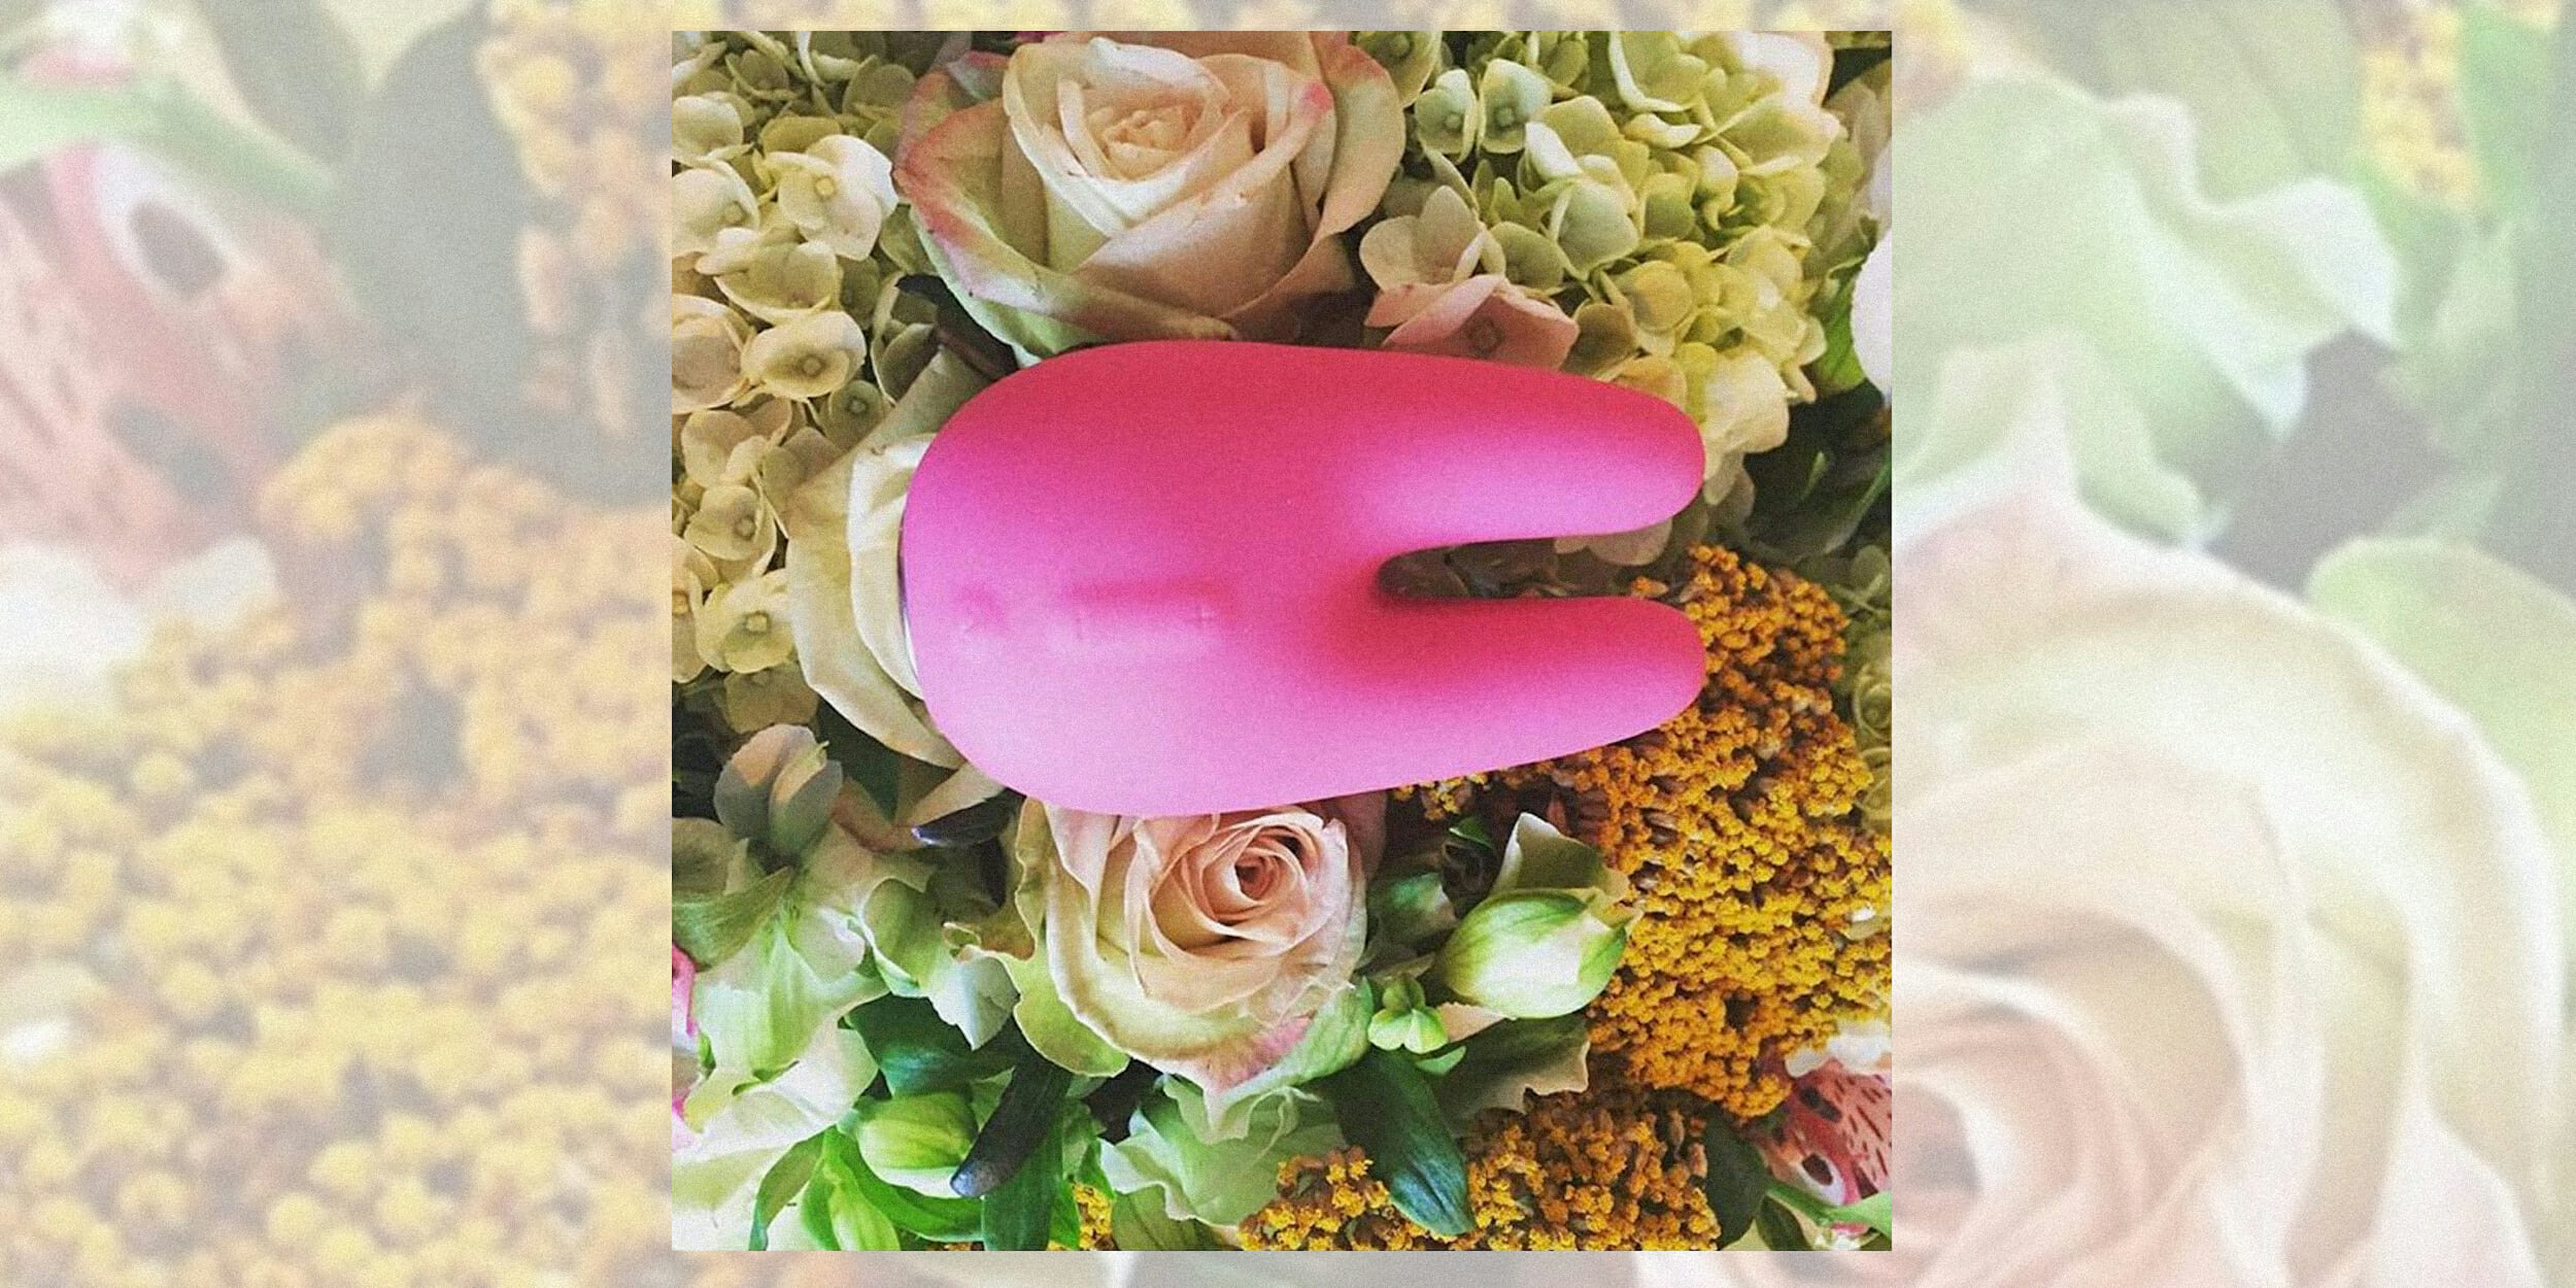 sex toys for women : Pink two-pronged vibrator on flowers